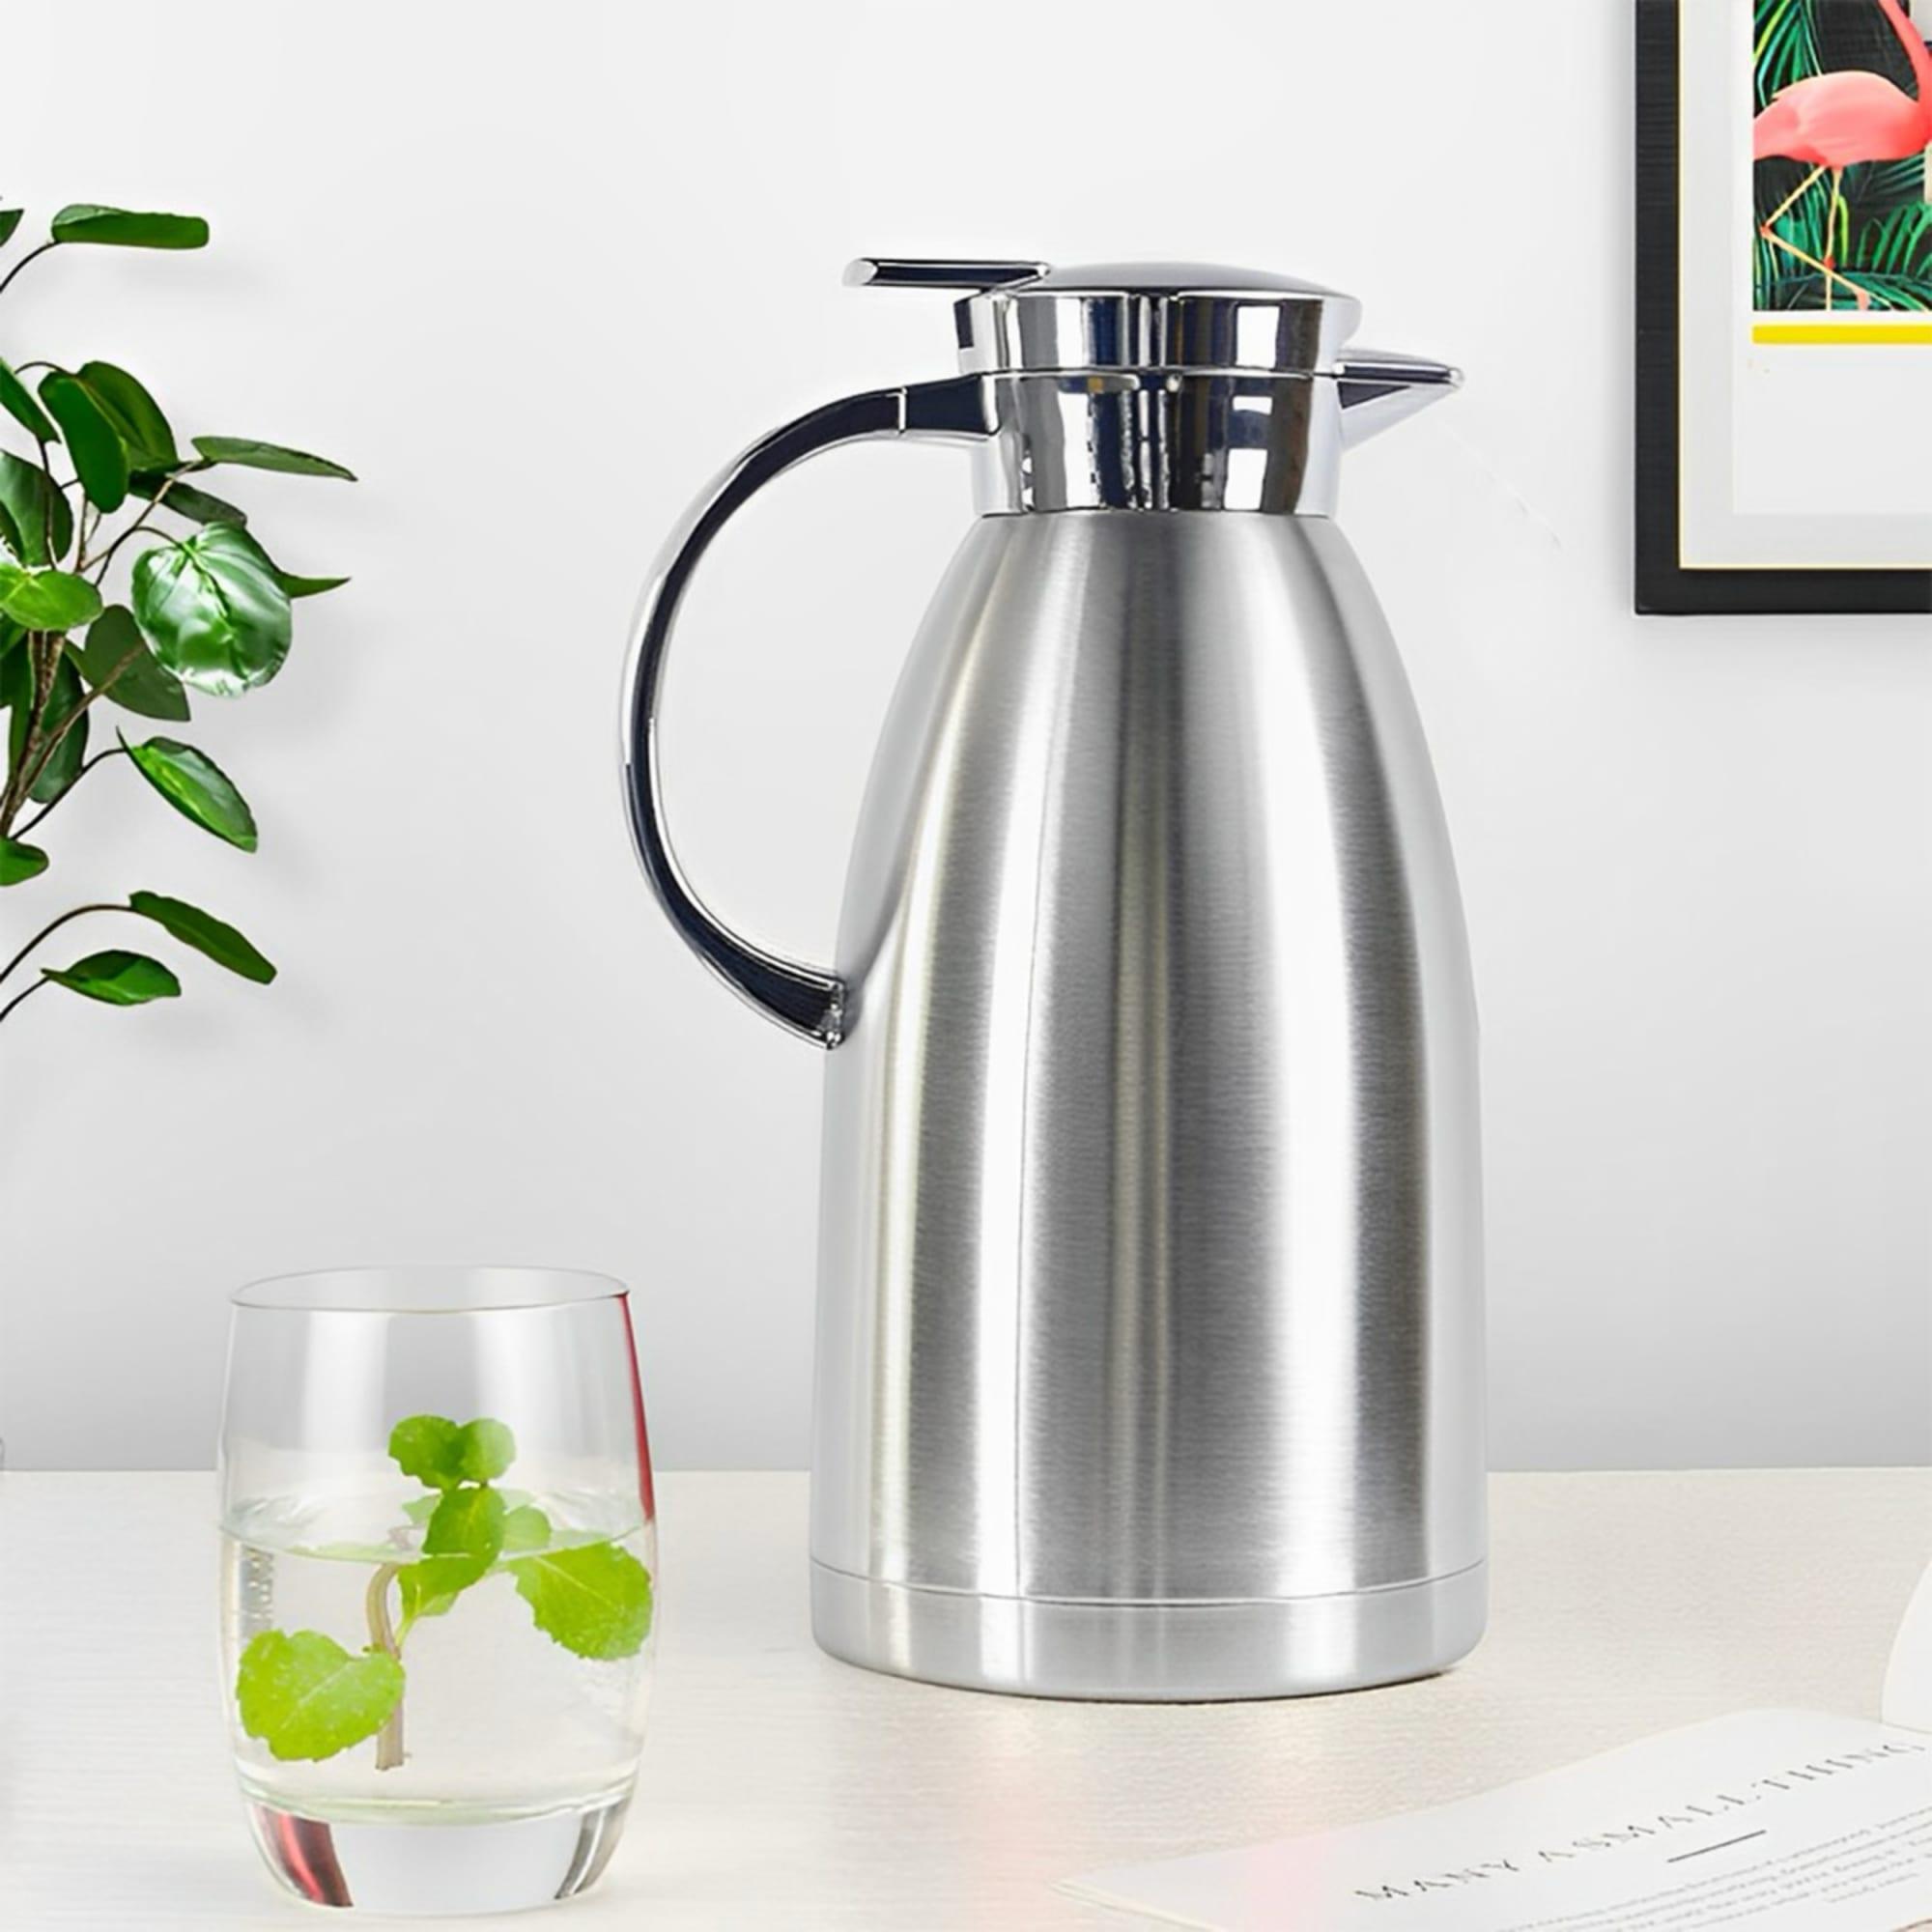 Soga Stainless Steel Insulated Kettle 2.3L Silver Image 3